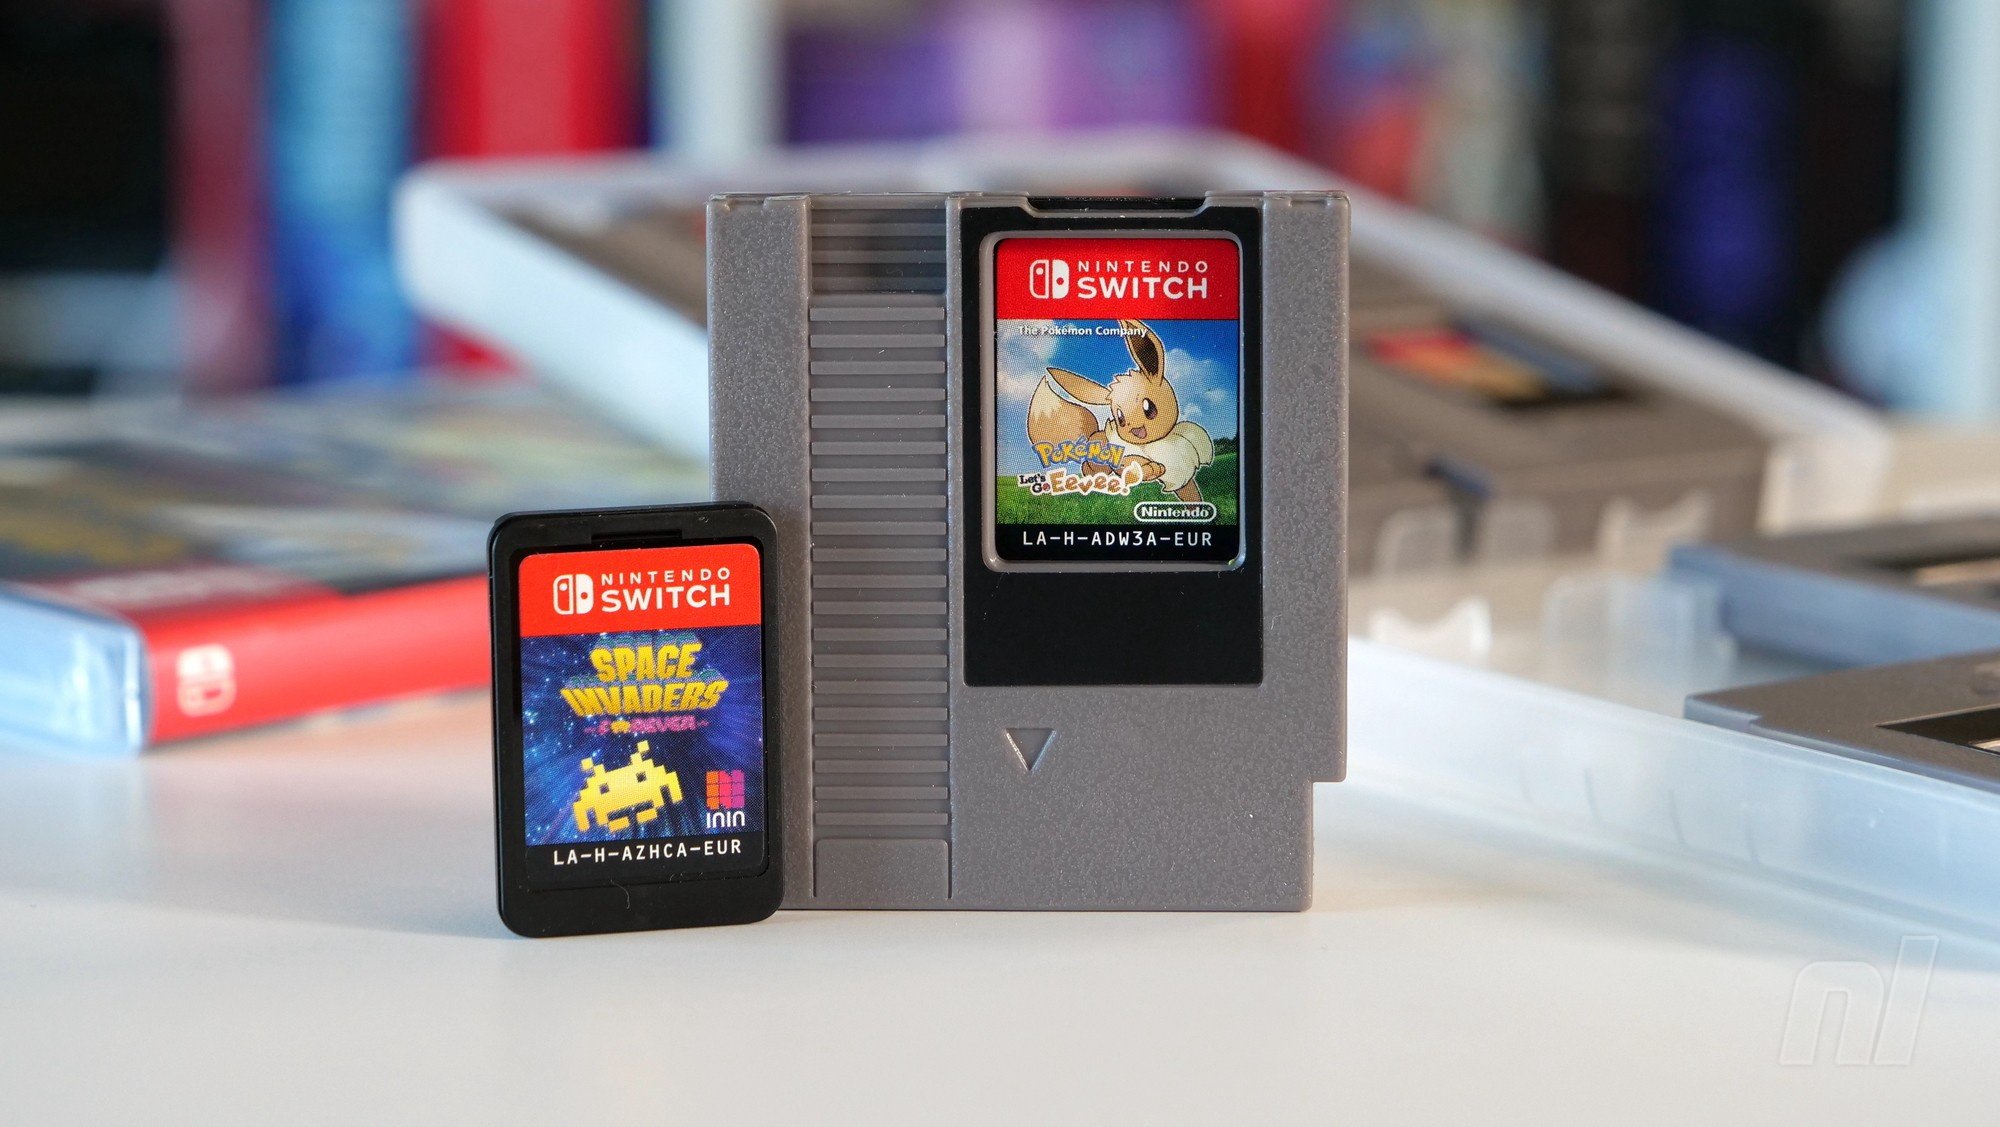 These Nes Style Switch Game Card Holders Are Adorable And Make Them Harder To Lose Nintendo Life